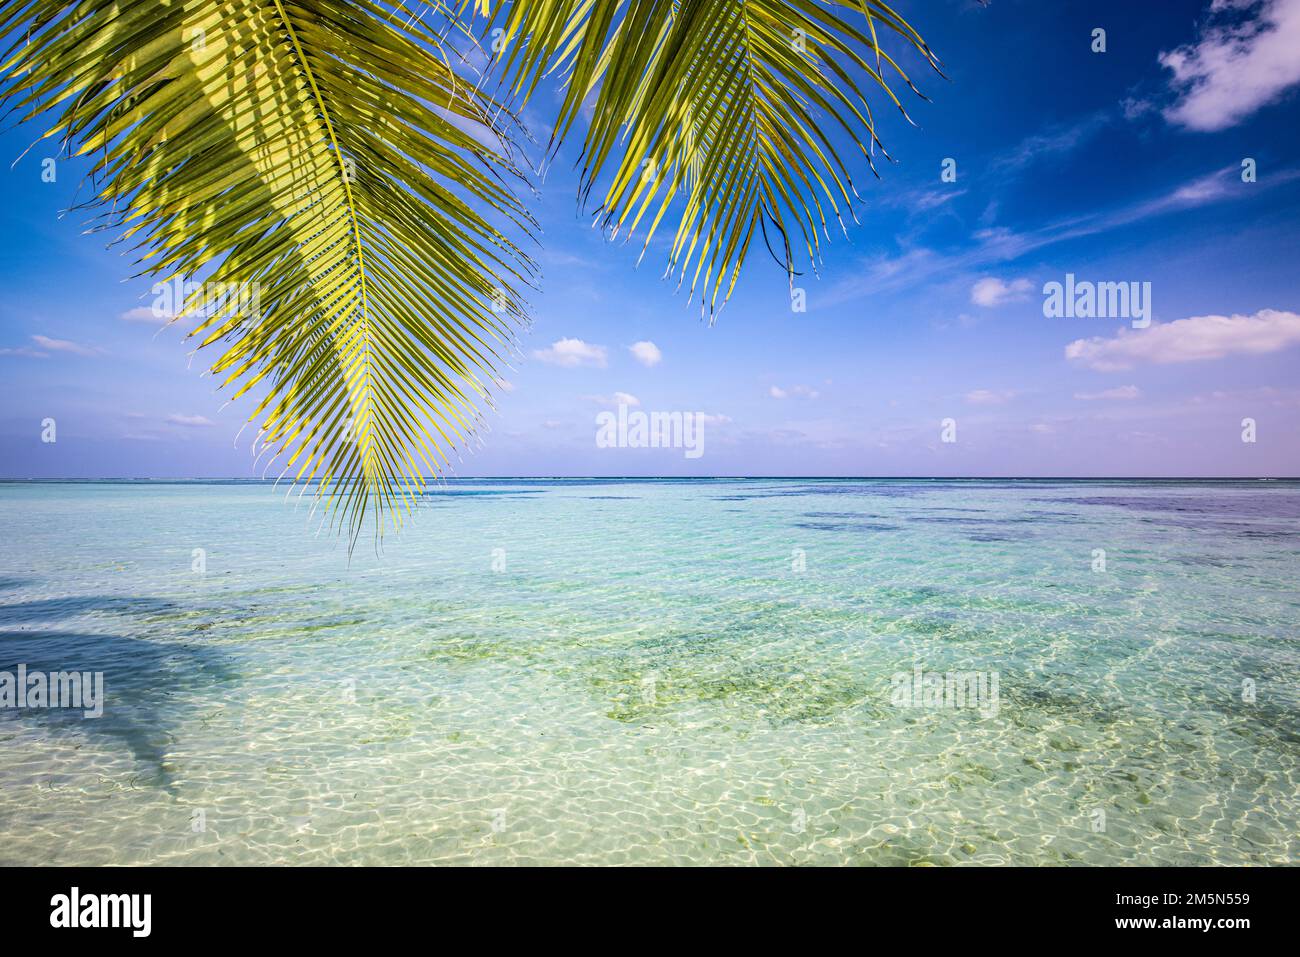 Beach palm tree leaves shadows on sunny sandy beach and turquoise ocean bay. Amazing summer nature landscape. Stunning beach coast scenery, relaxing Stock Photo